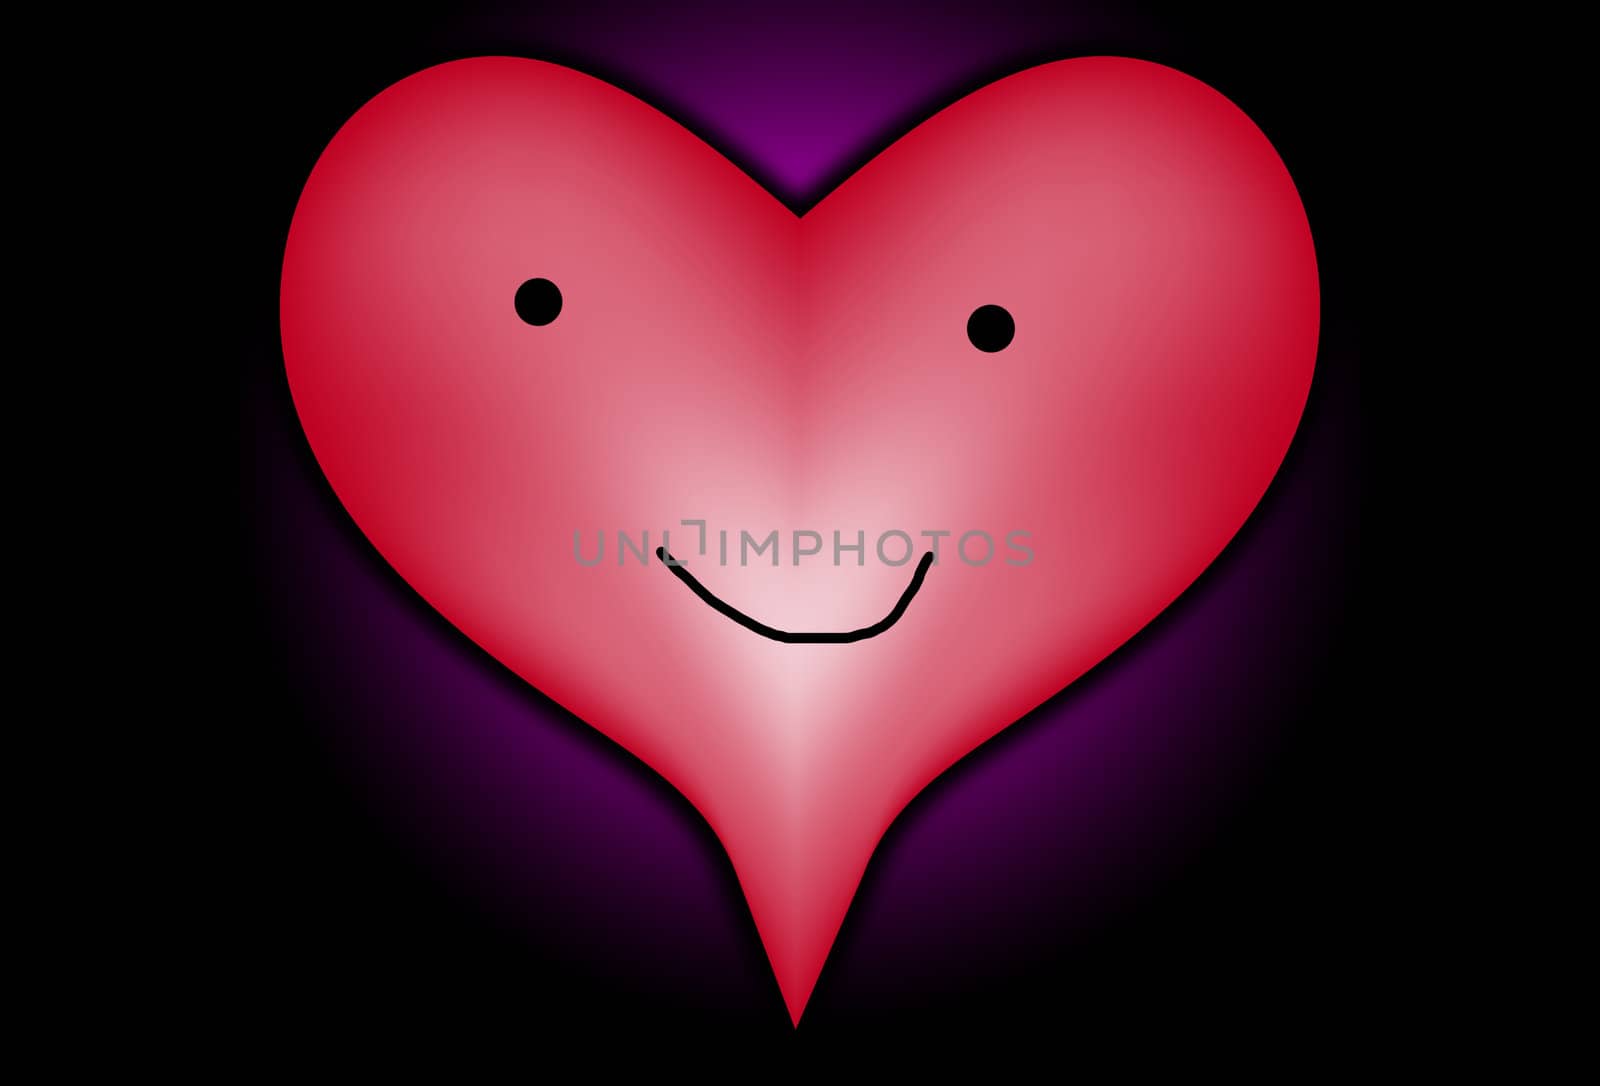 Heart symbol with a smiling face.